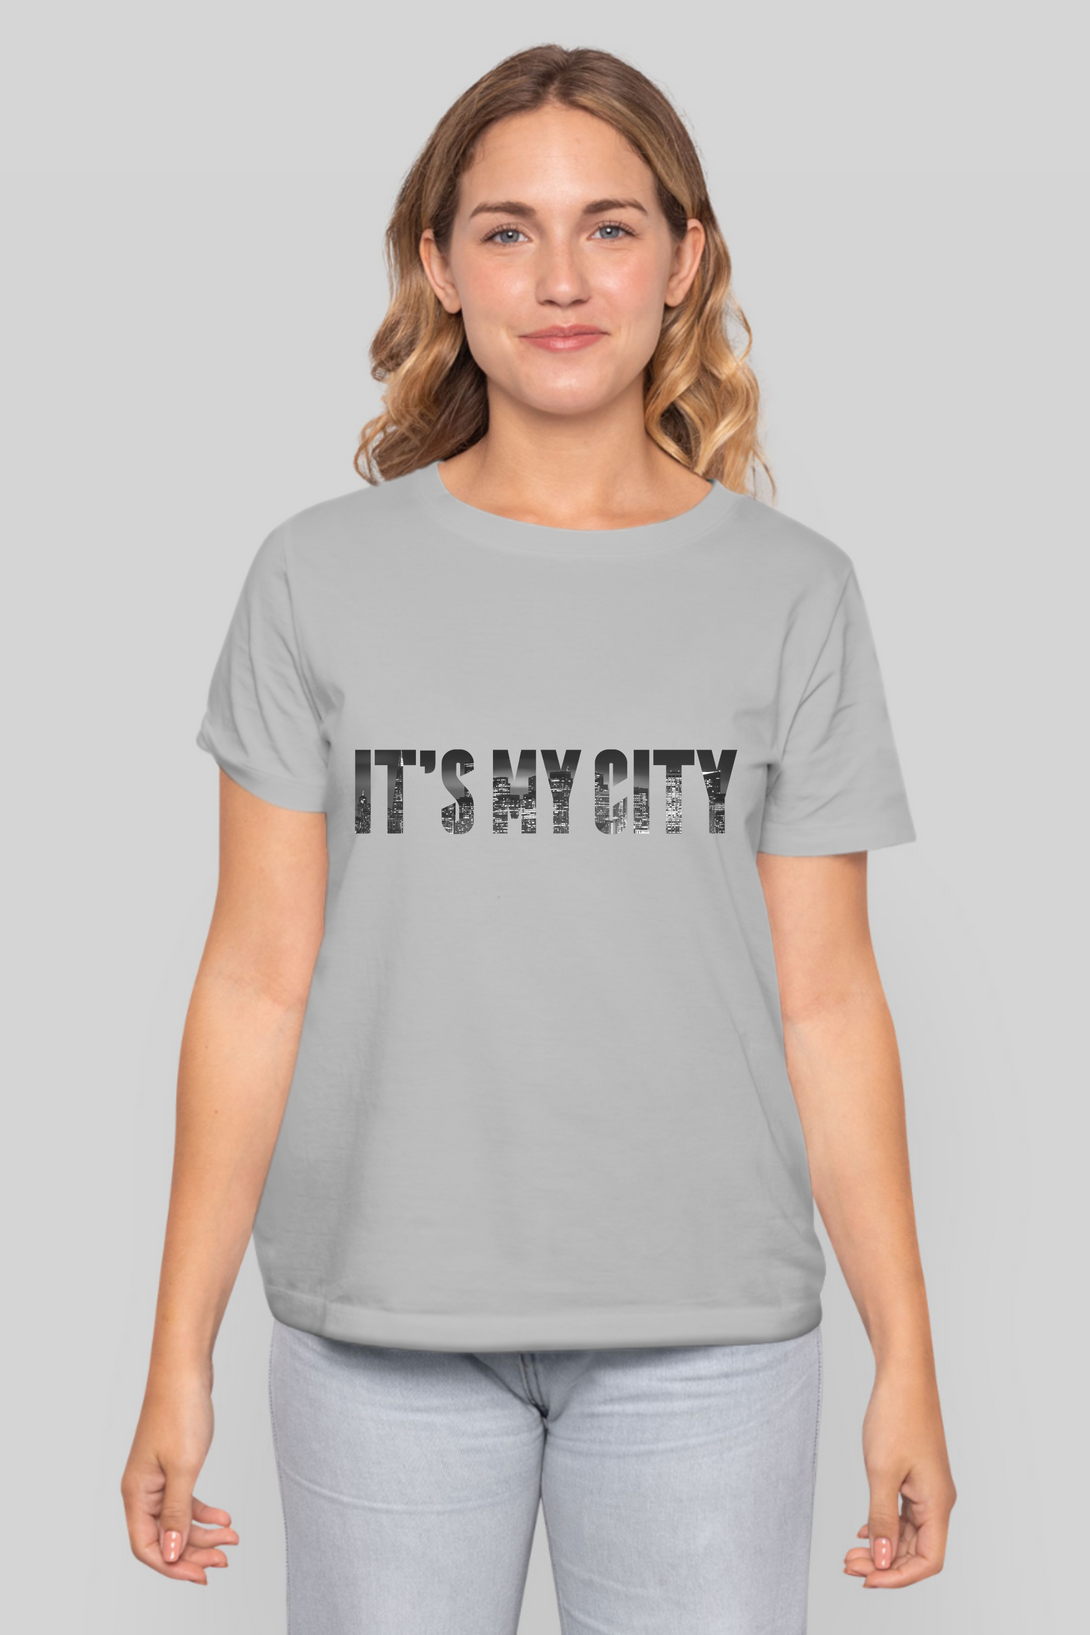 It'S My City Printed T-Shirt For Women - WowWaves - 4